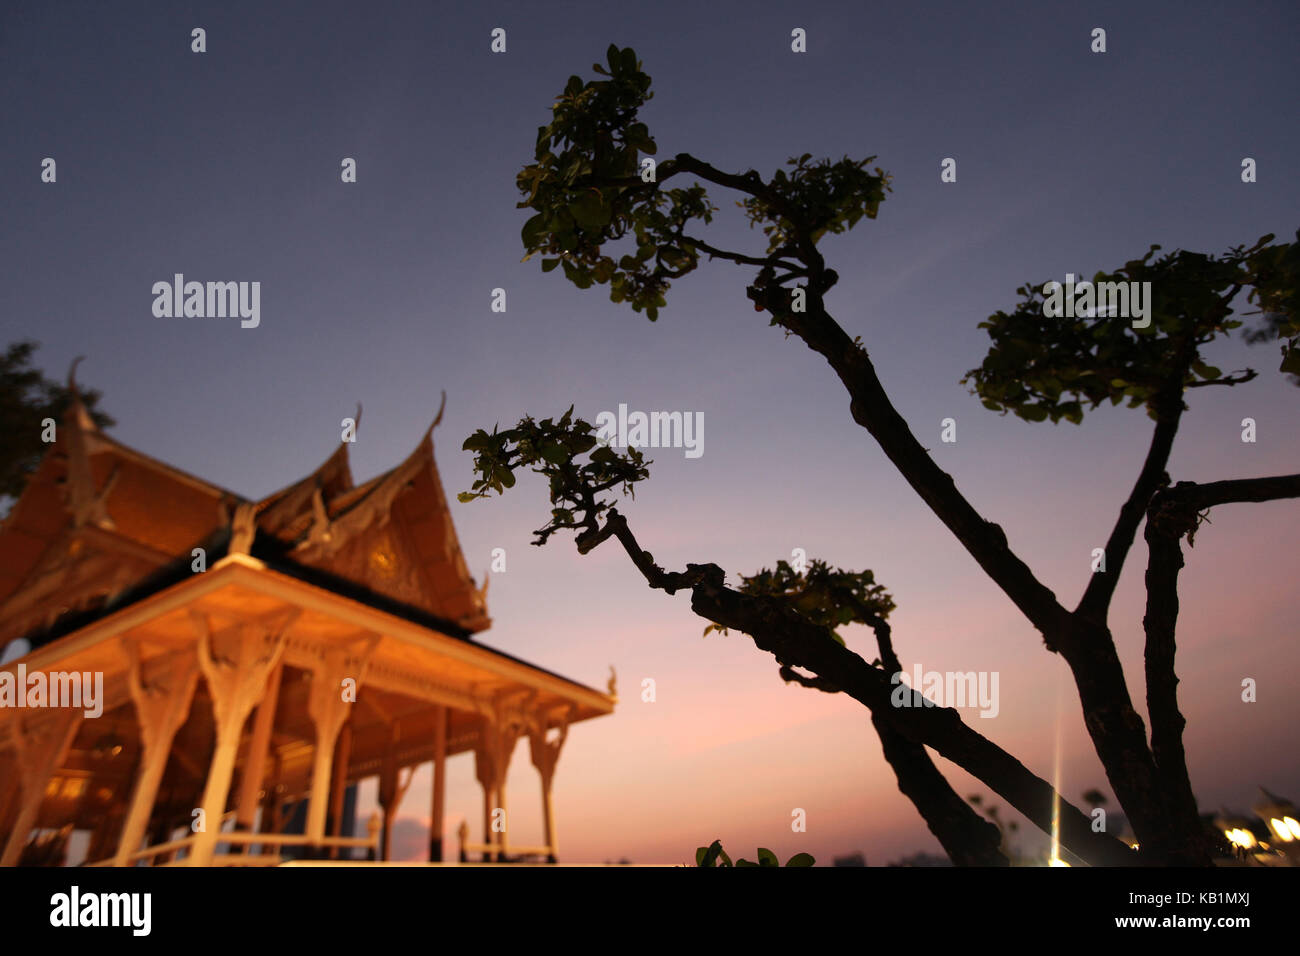 Asia, South-East Asia, Thailand, Bangkok, park, fort, fortress, Phra Sumen, Stock Photo